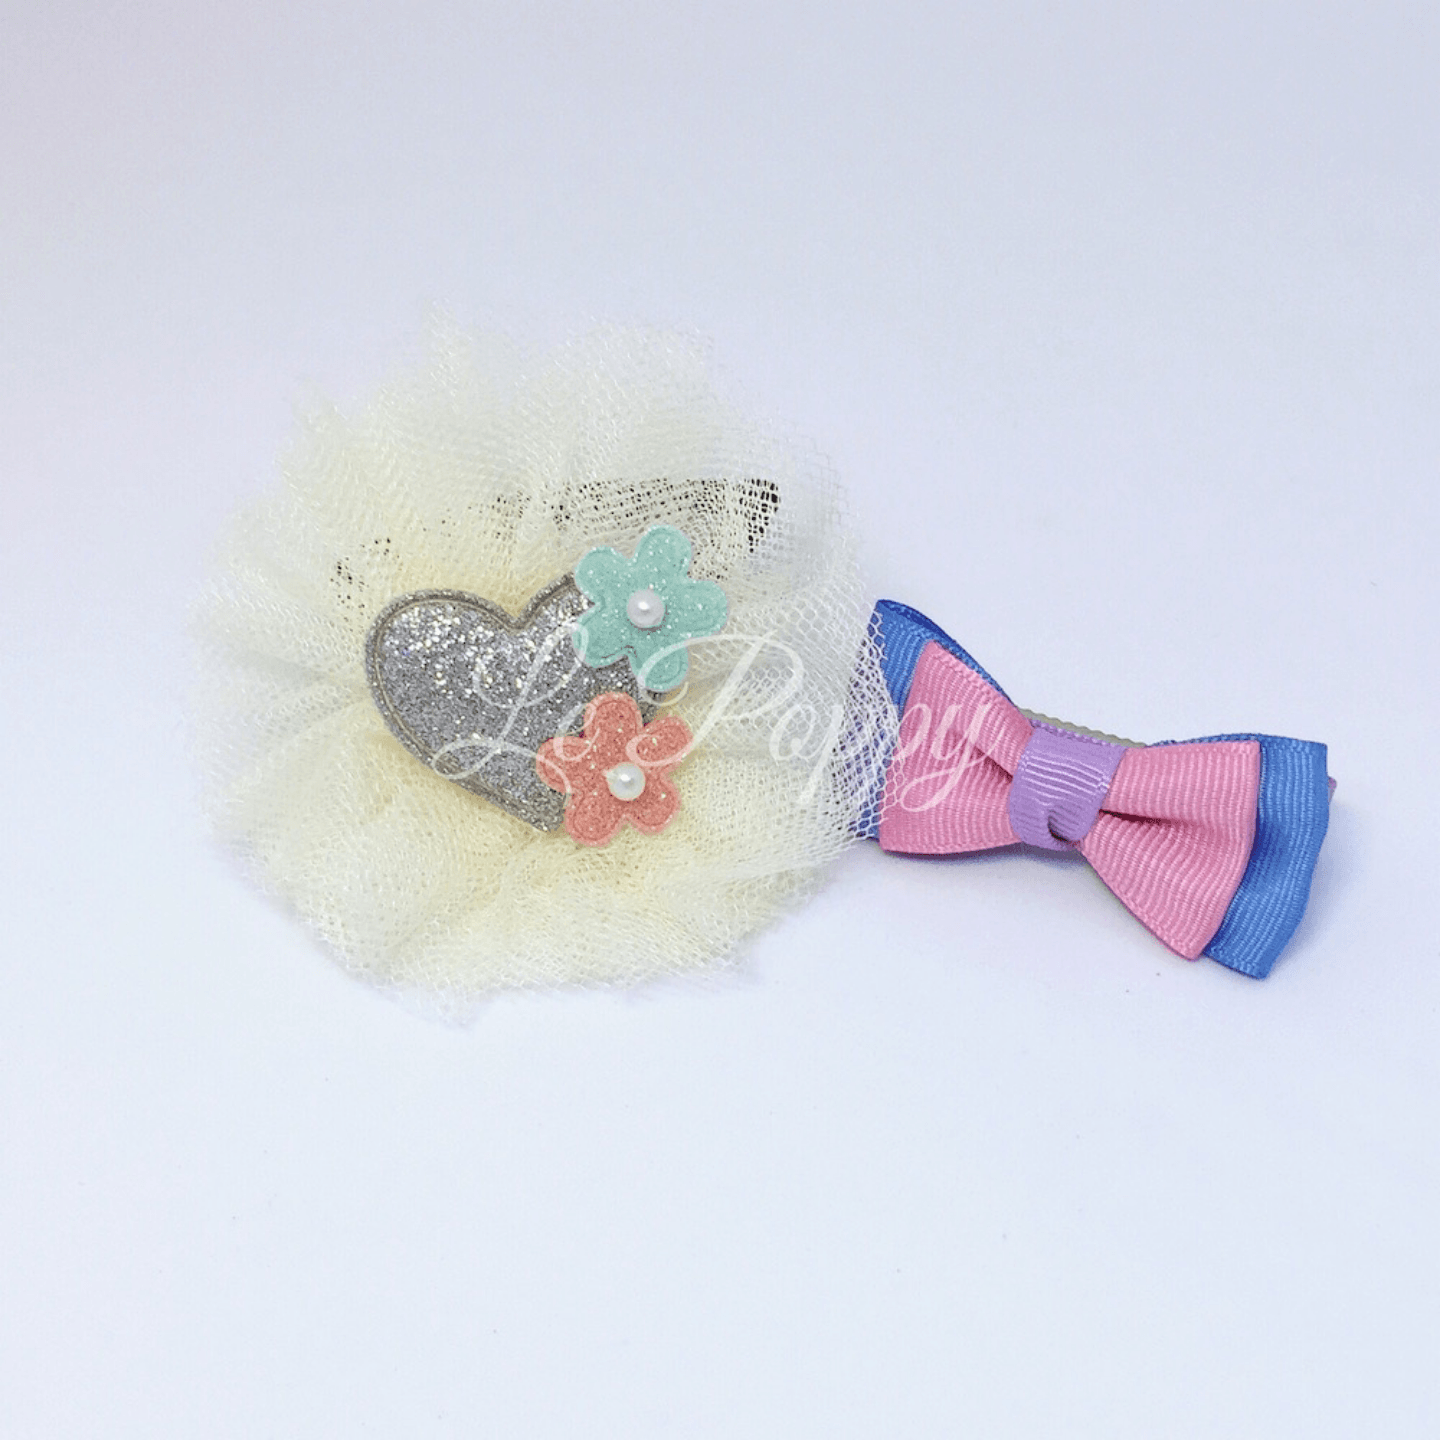 Glittery Applique on Tulle with Matching Bow